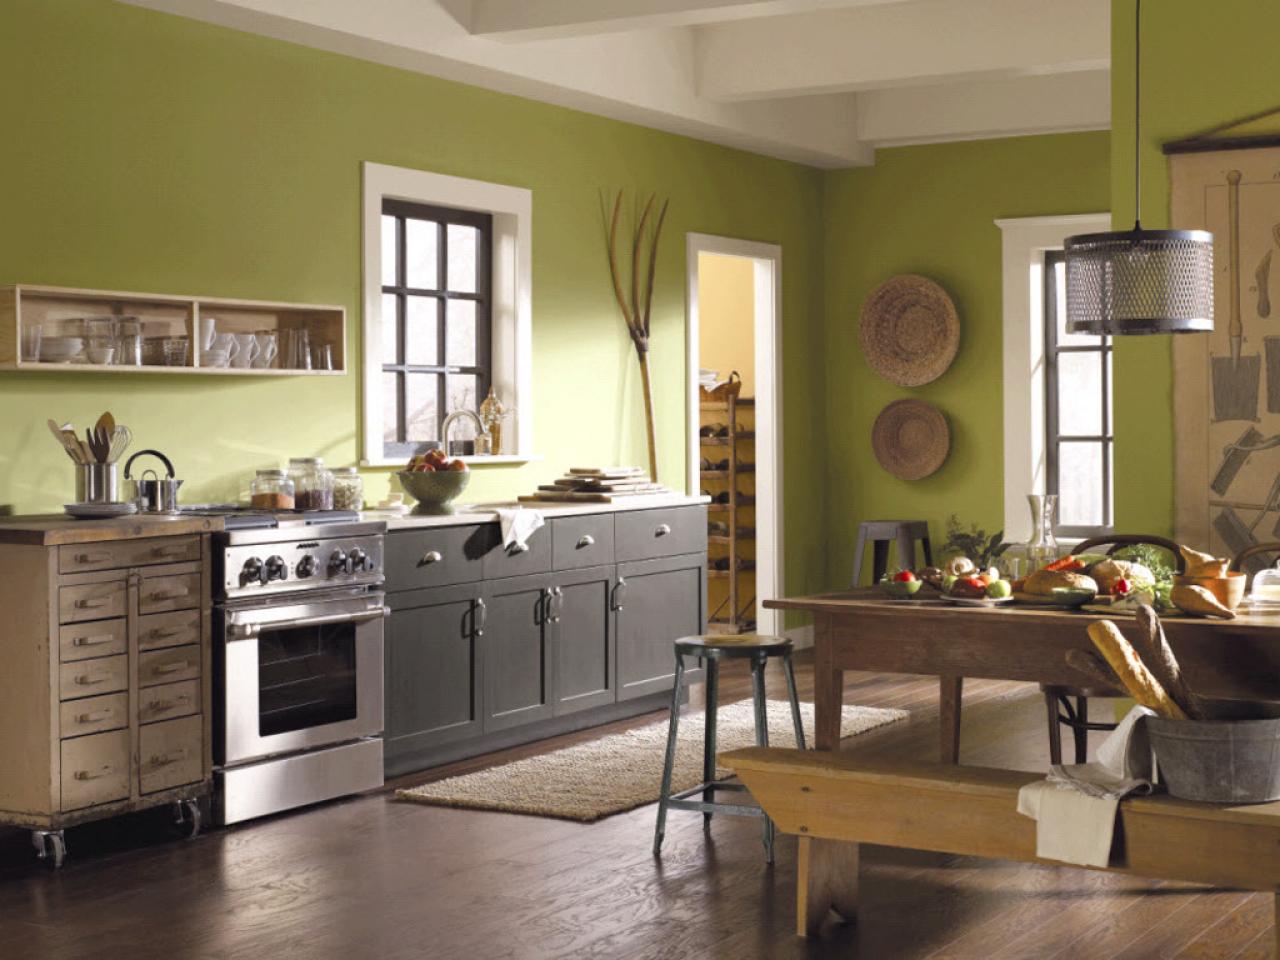 Green Kitchen Paint Colors Pictures Ideas From Hgtv Hgtv,Living Room Types Of Window Coverings